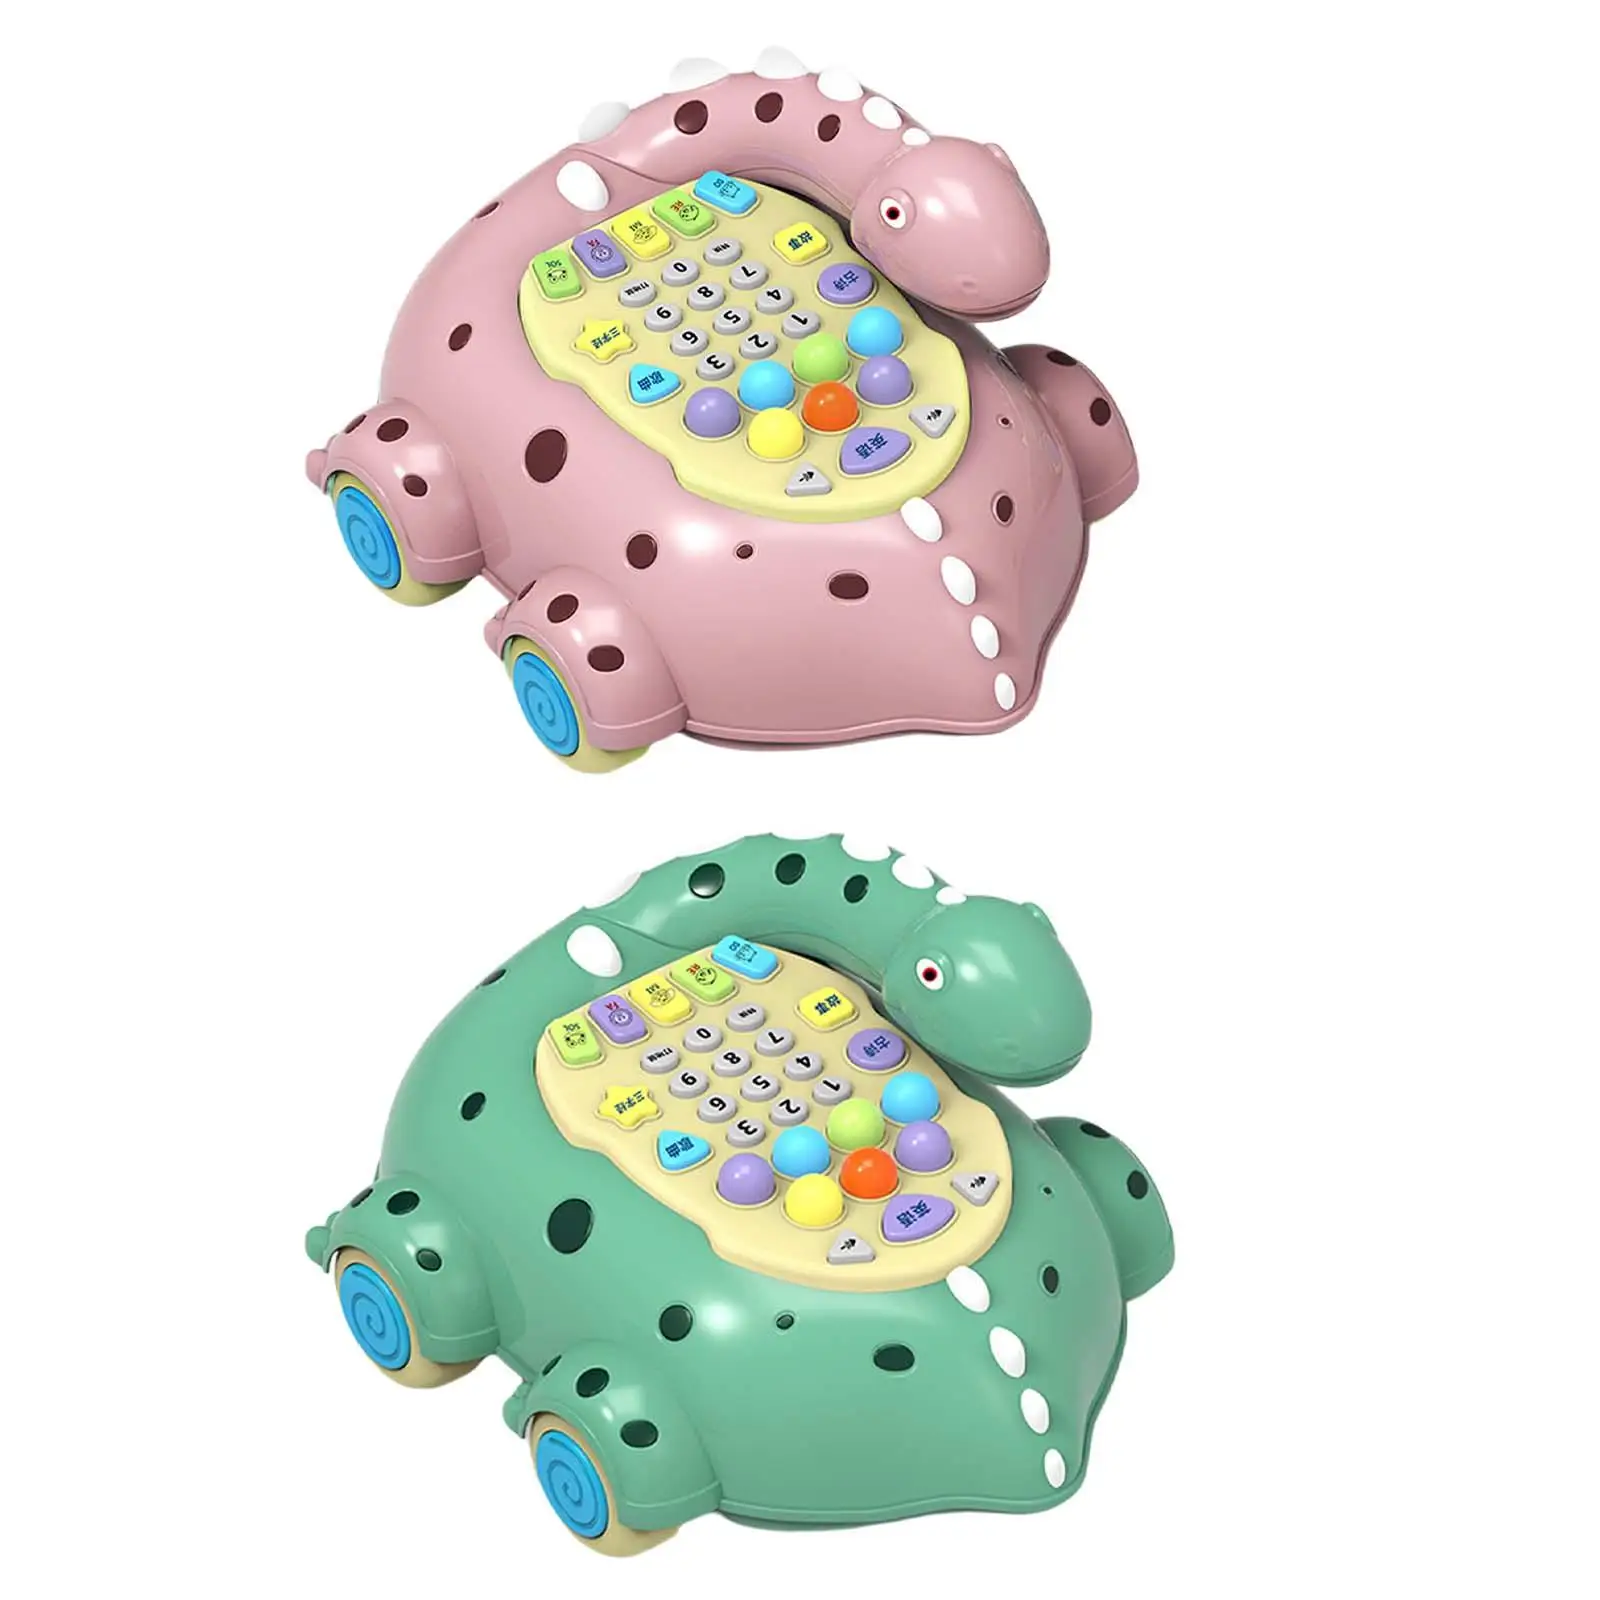 Music Light Phone Toy Children Phone Toy for Activity Education Preschool